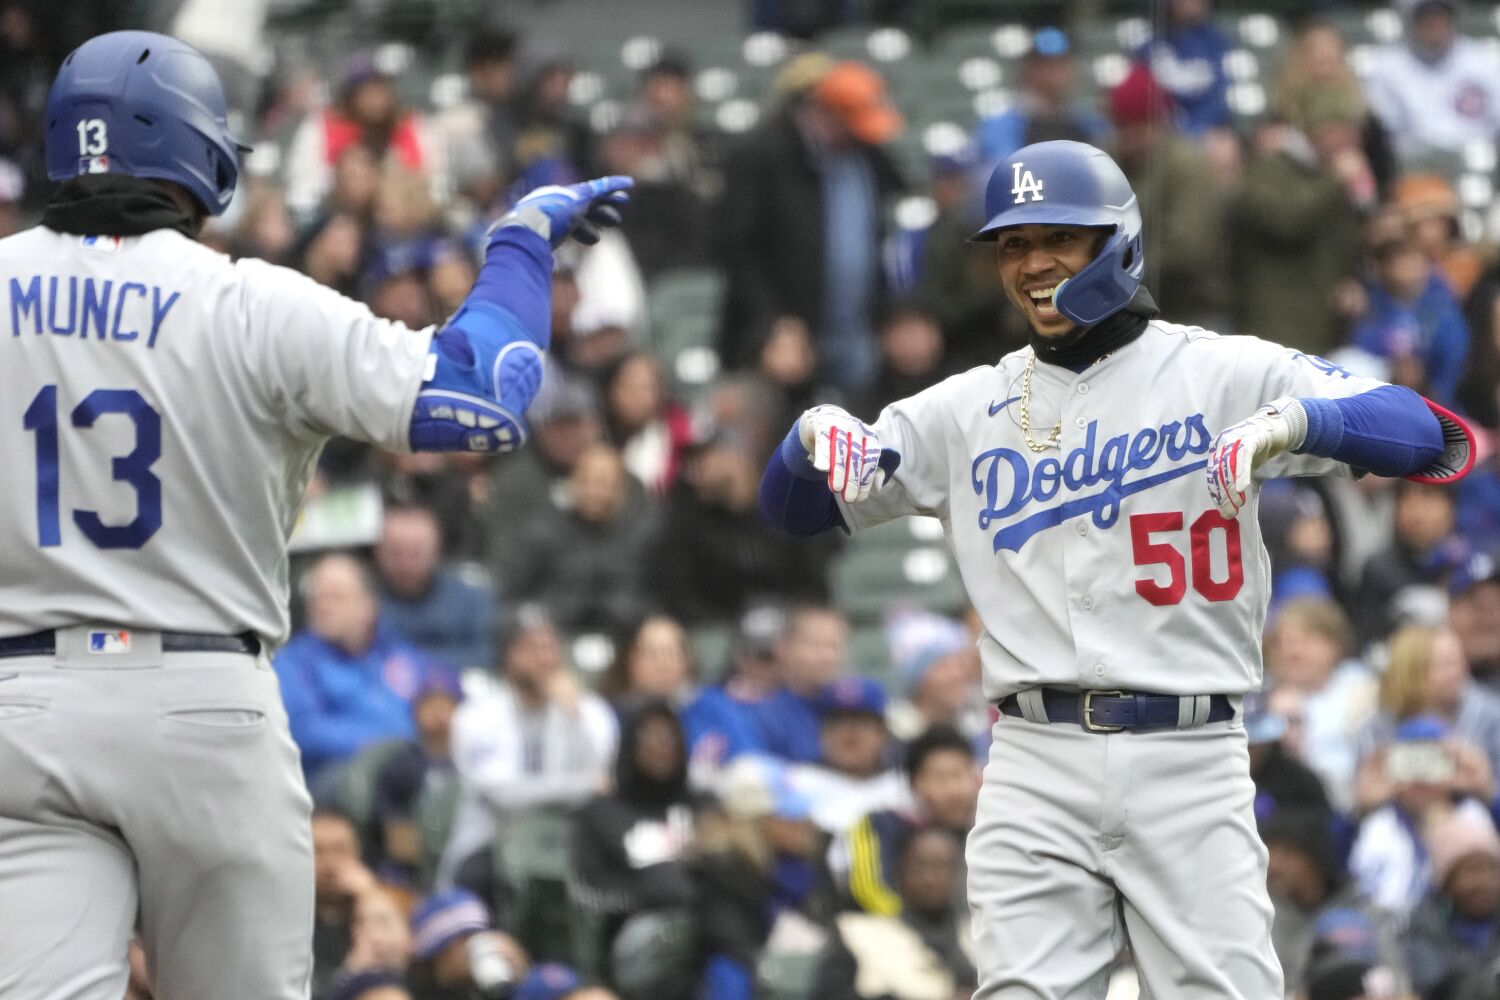 Why are so many Dodgers having babies? 'I think everyone had a great All-Star break'